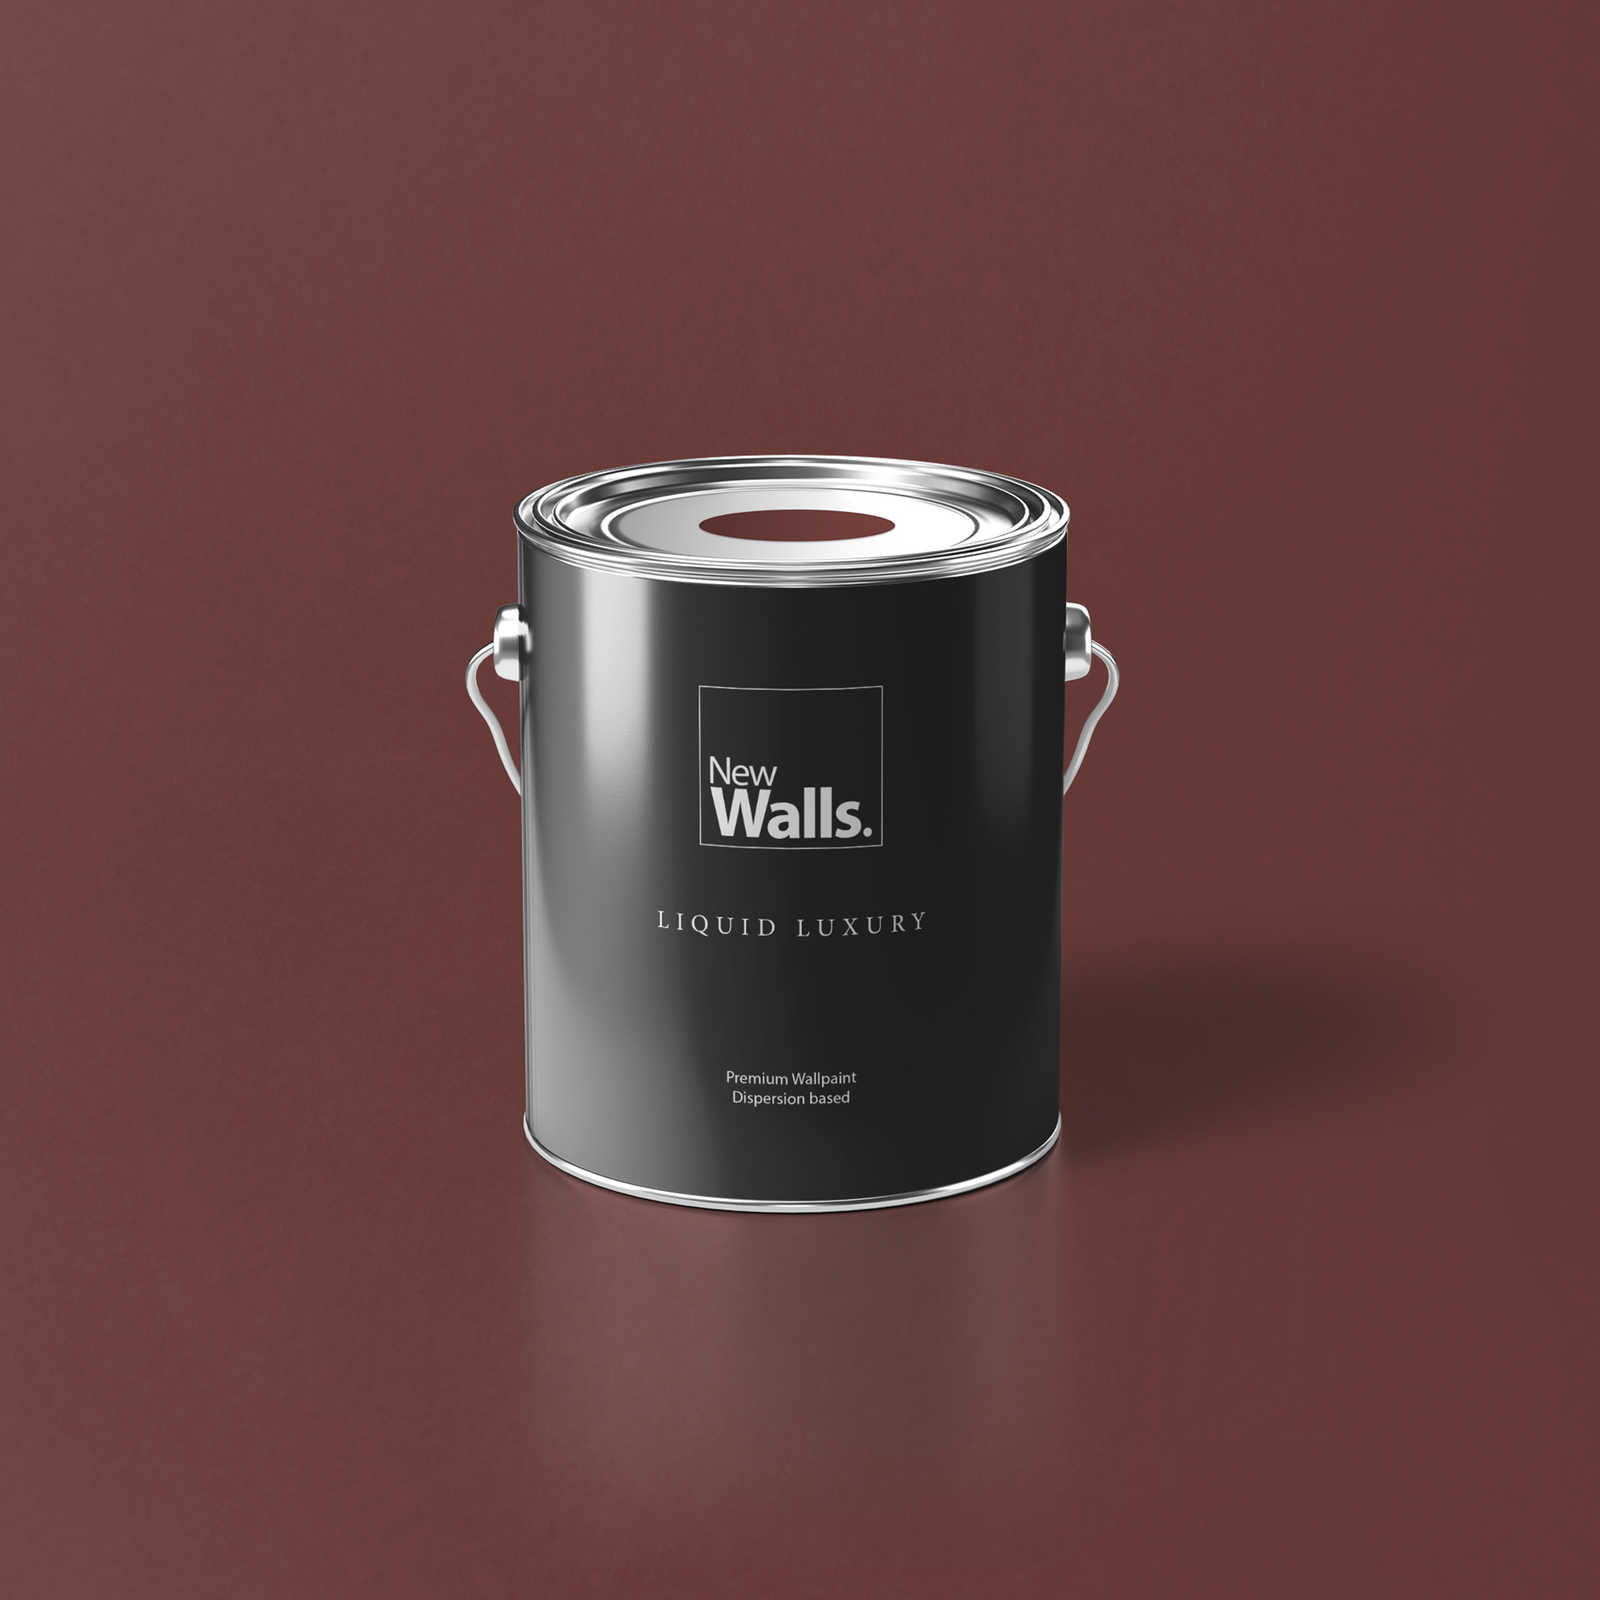 Premium Wall Paint noble chestnut red »Luxury Lipstick« NW1007 – 2.5 litre
